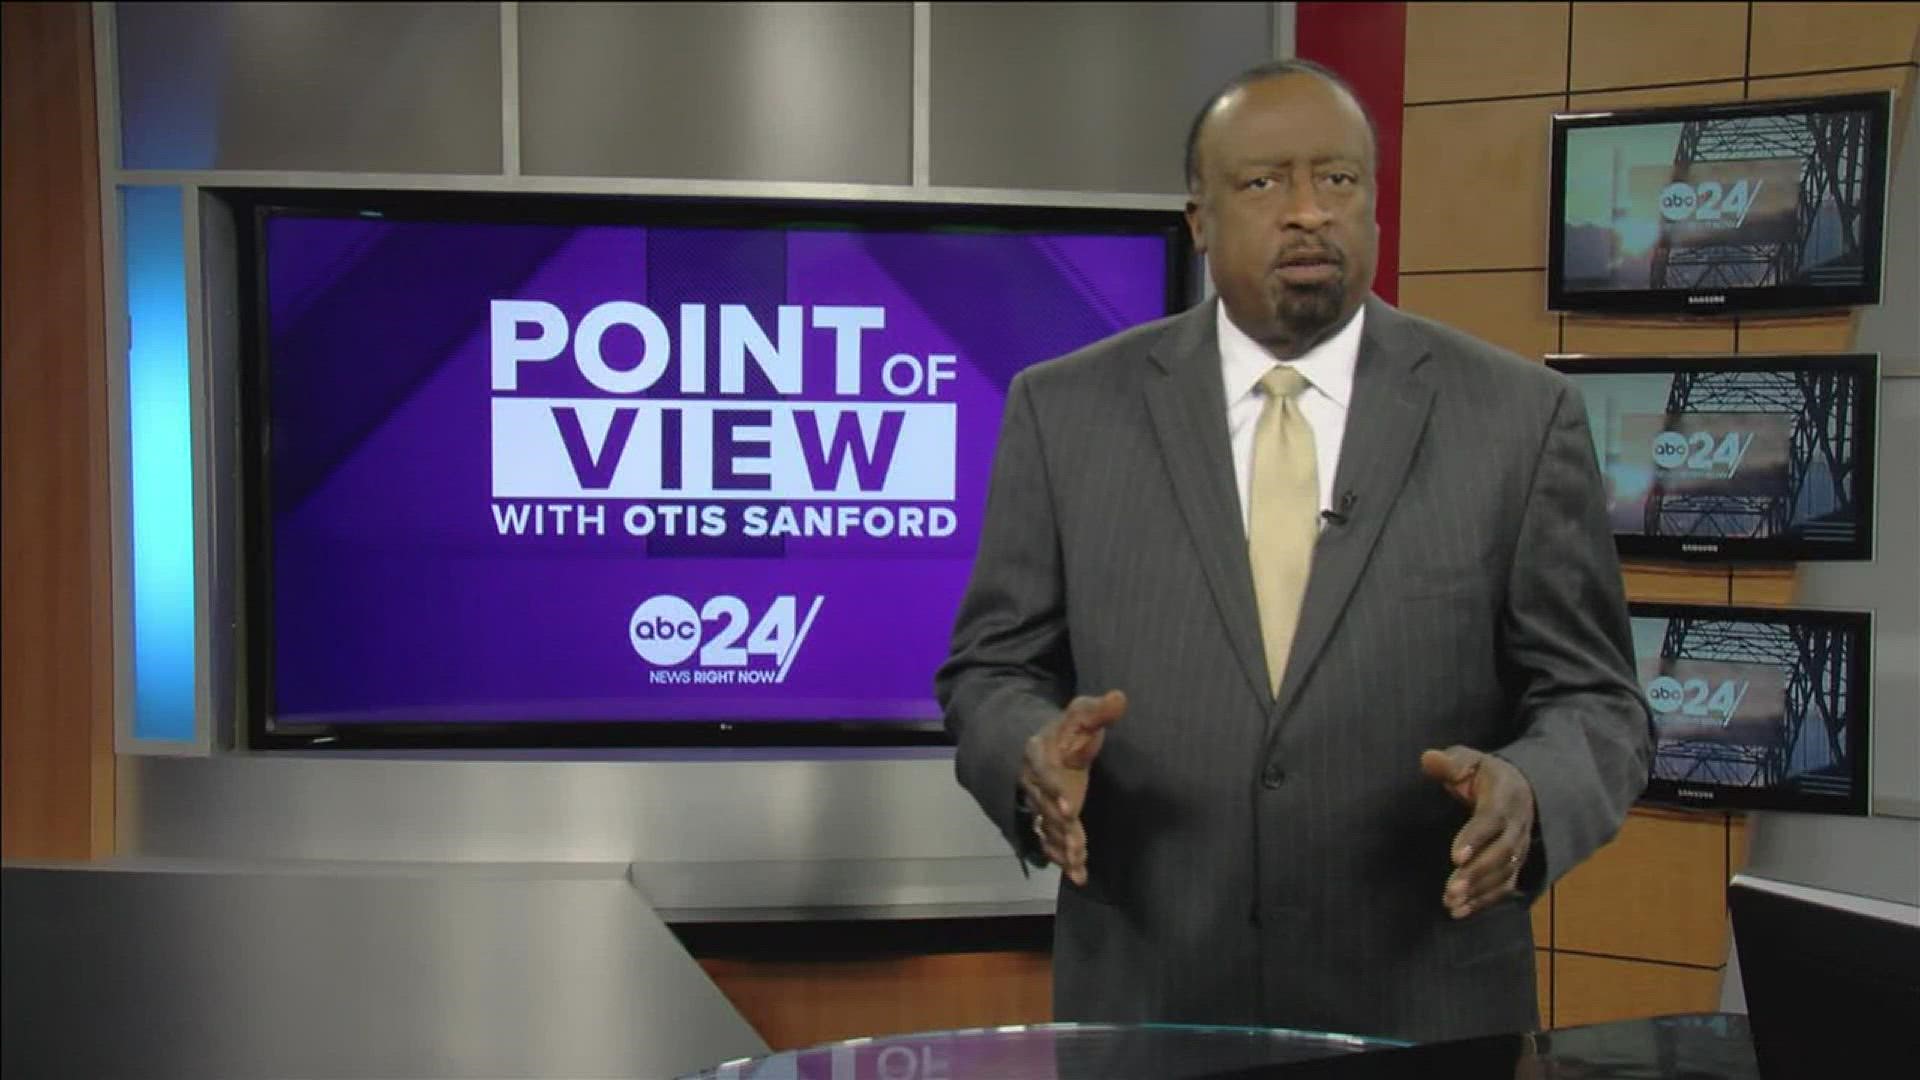 ABC 24 political analyst and commentator Otis Sanford shared his point of view the public’s right to see some government reports.